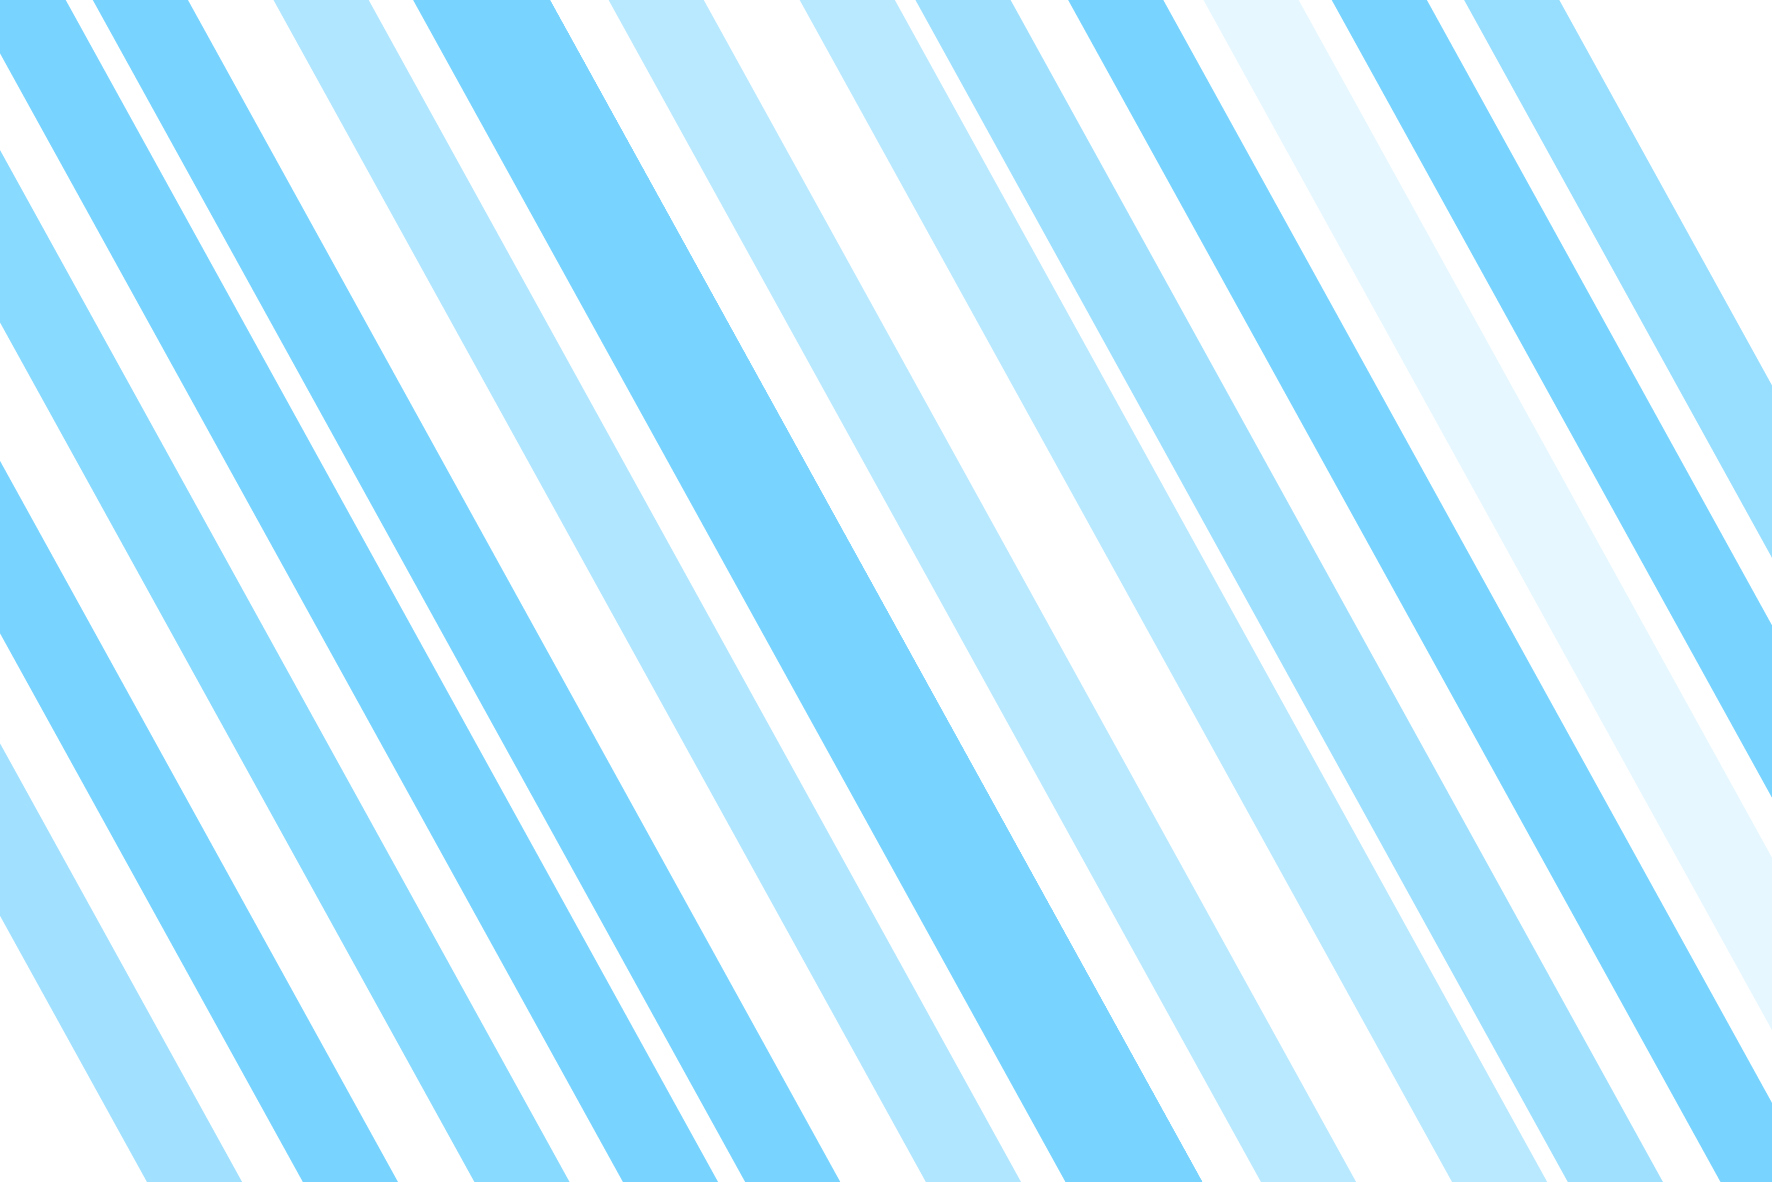 An abstract image showing diagonal light blue stripes.